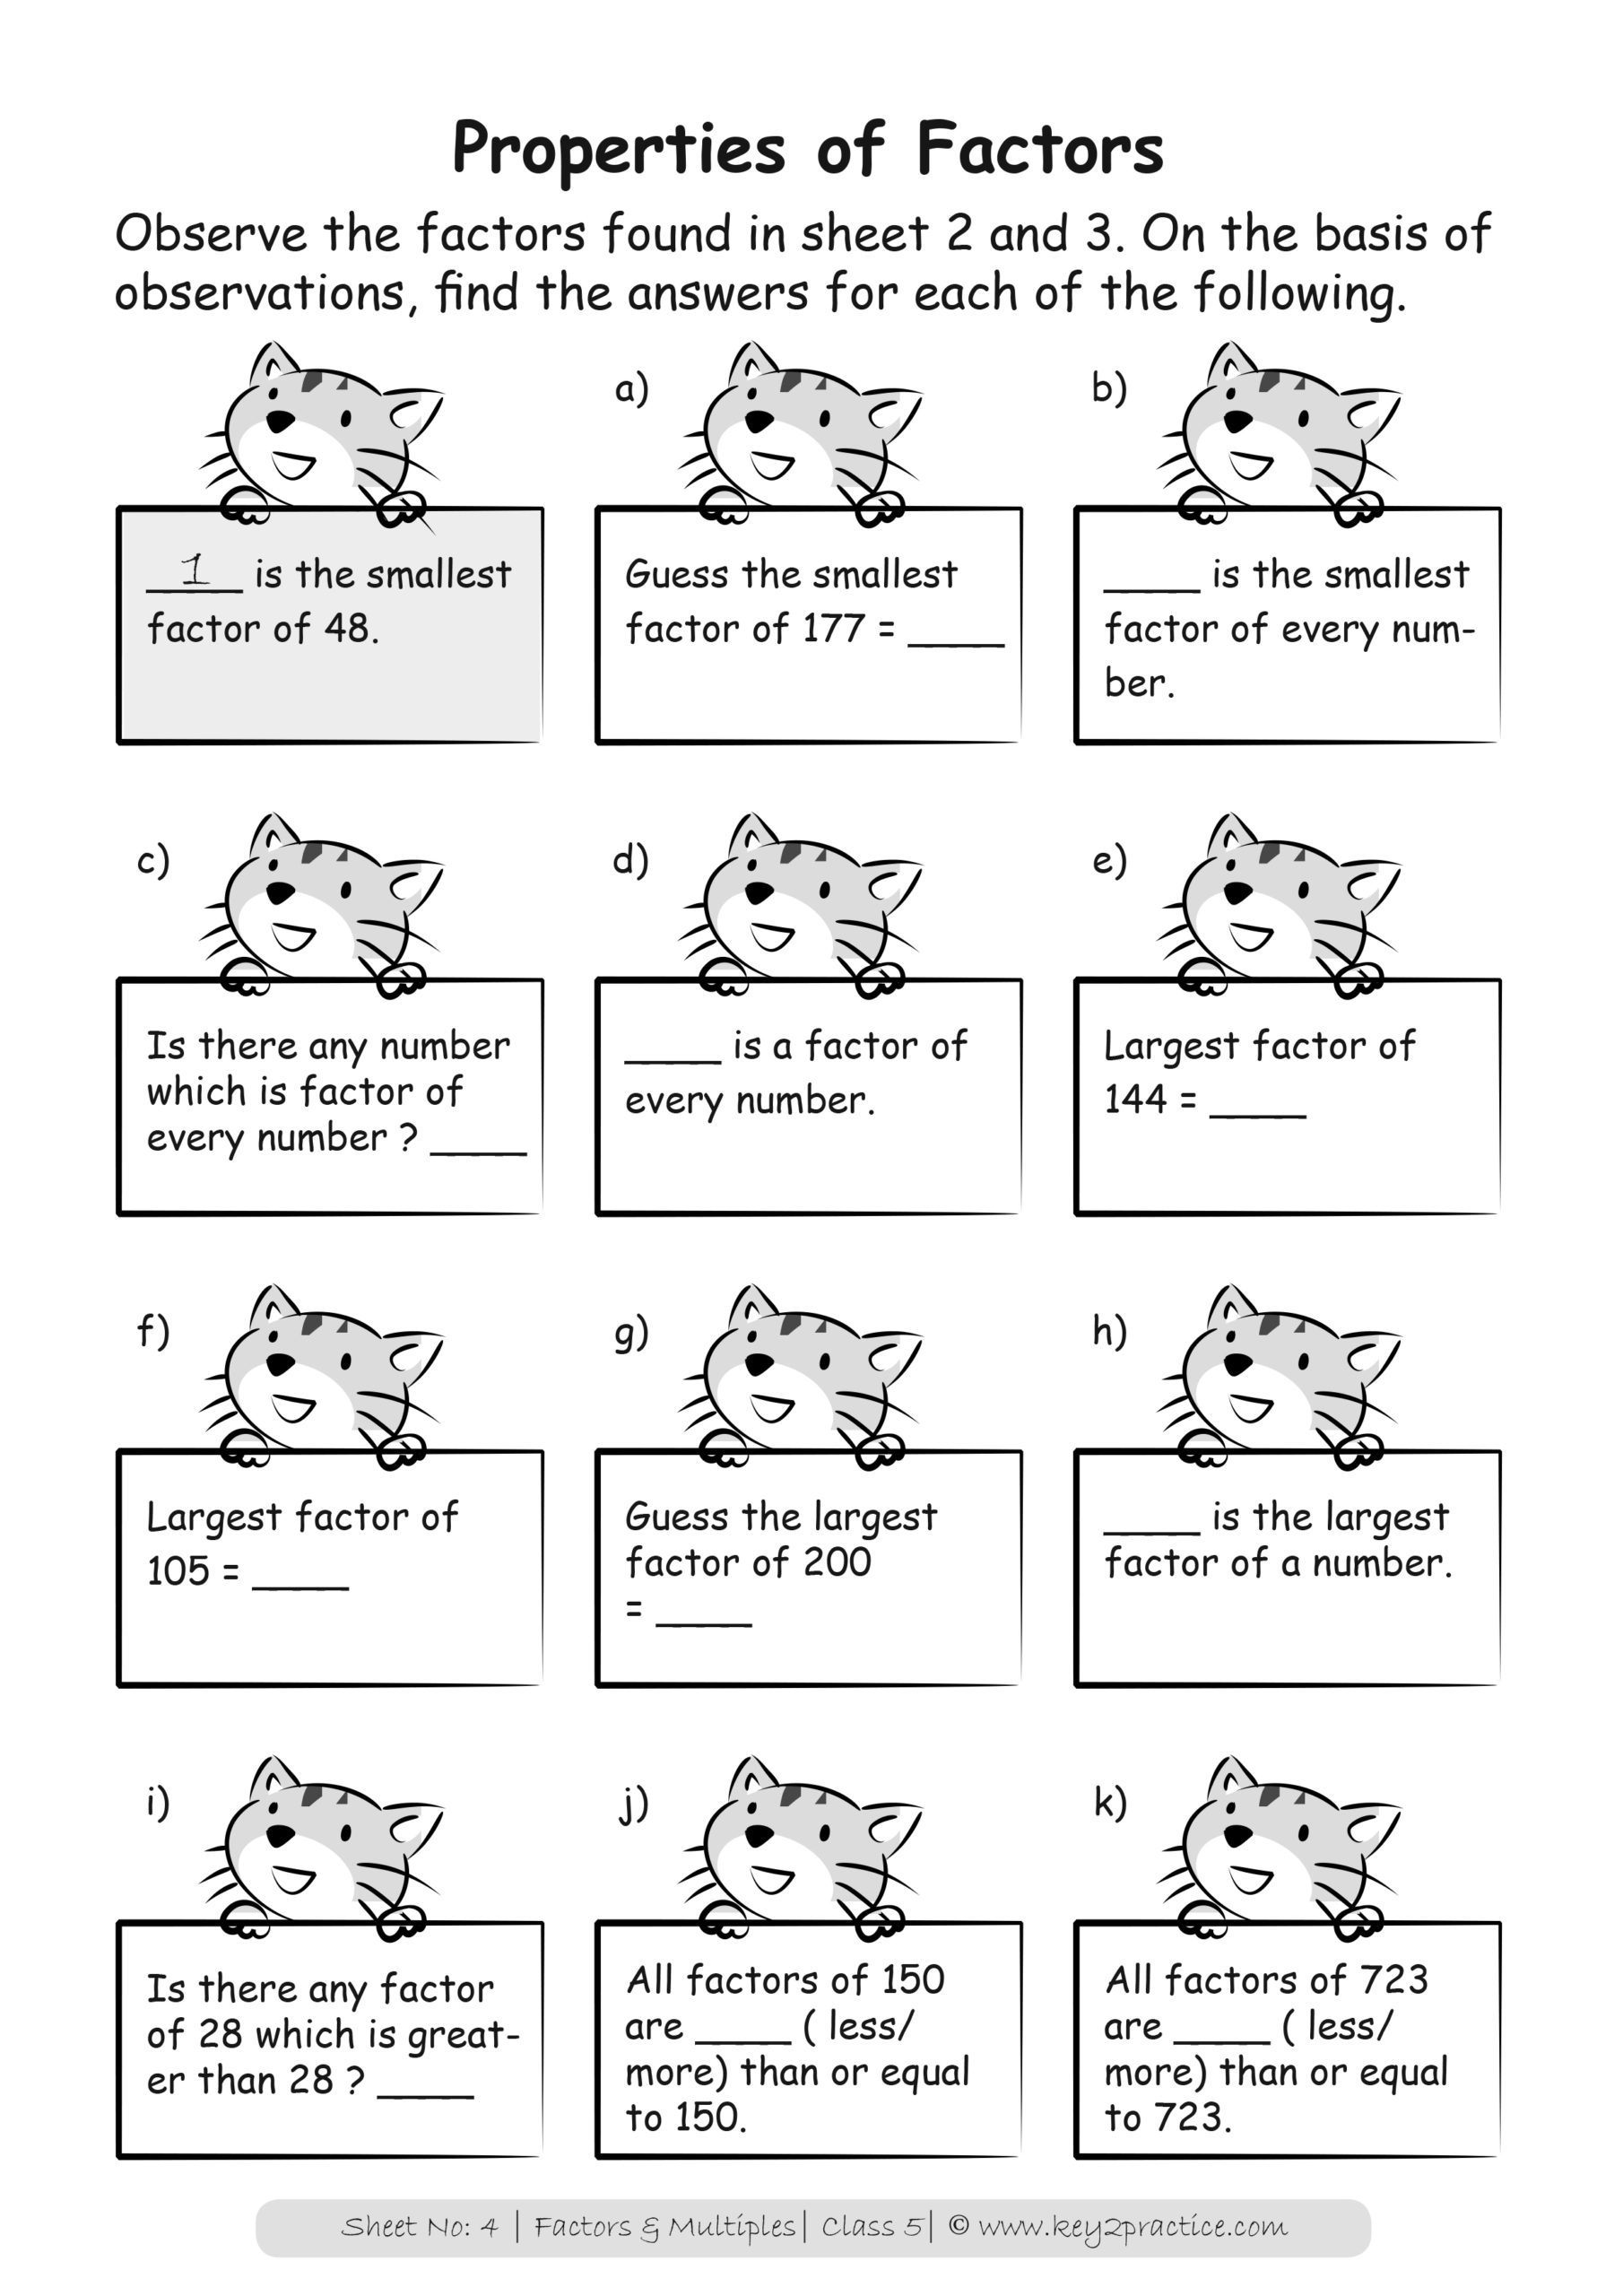 factors-and-multiples-facts-worksheets-for-kids